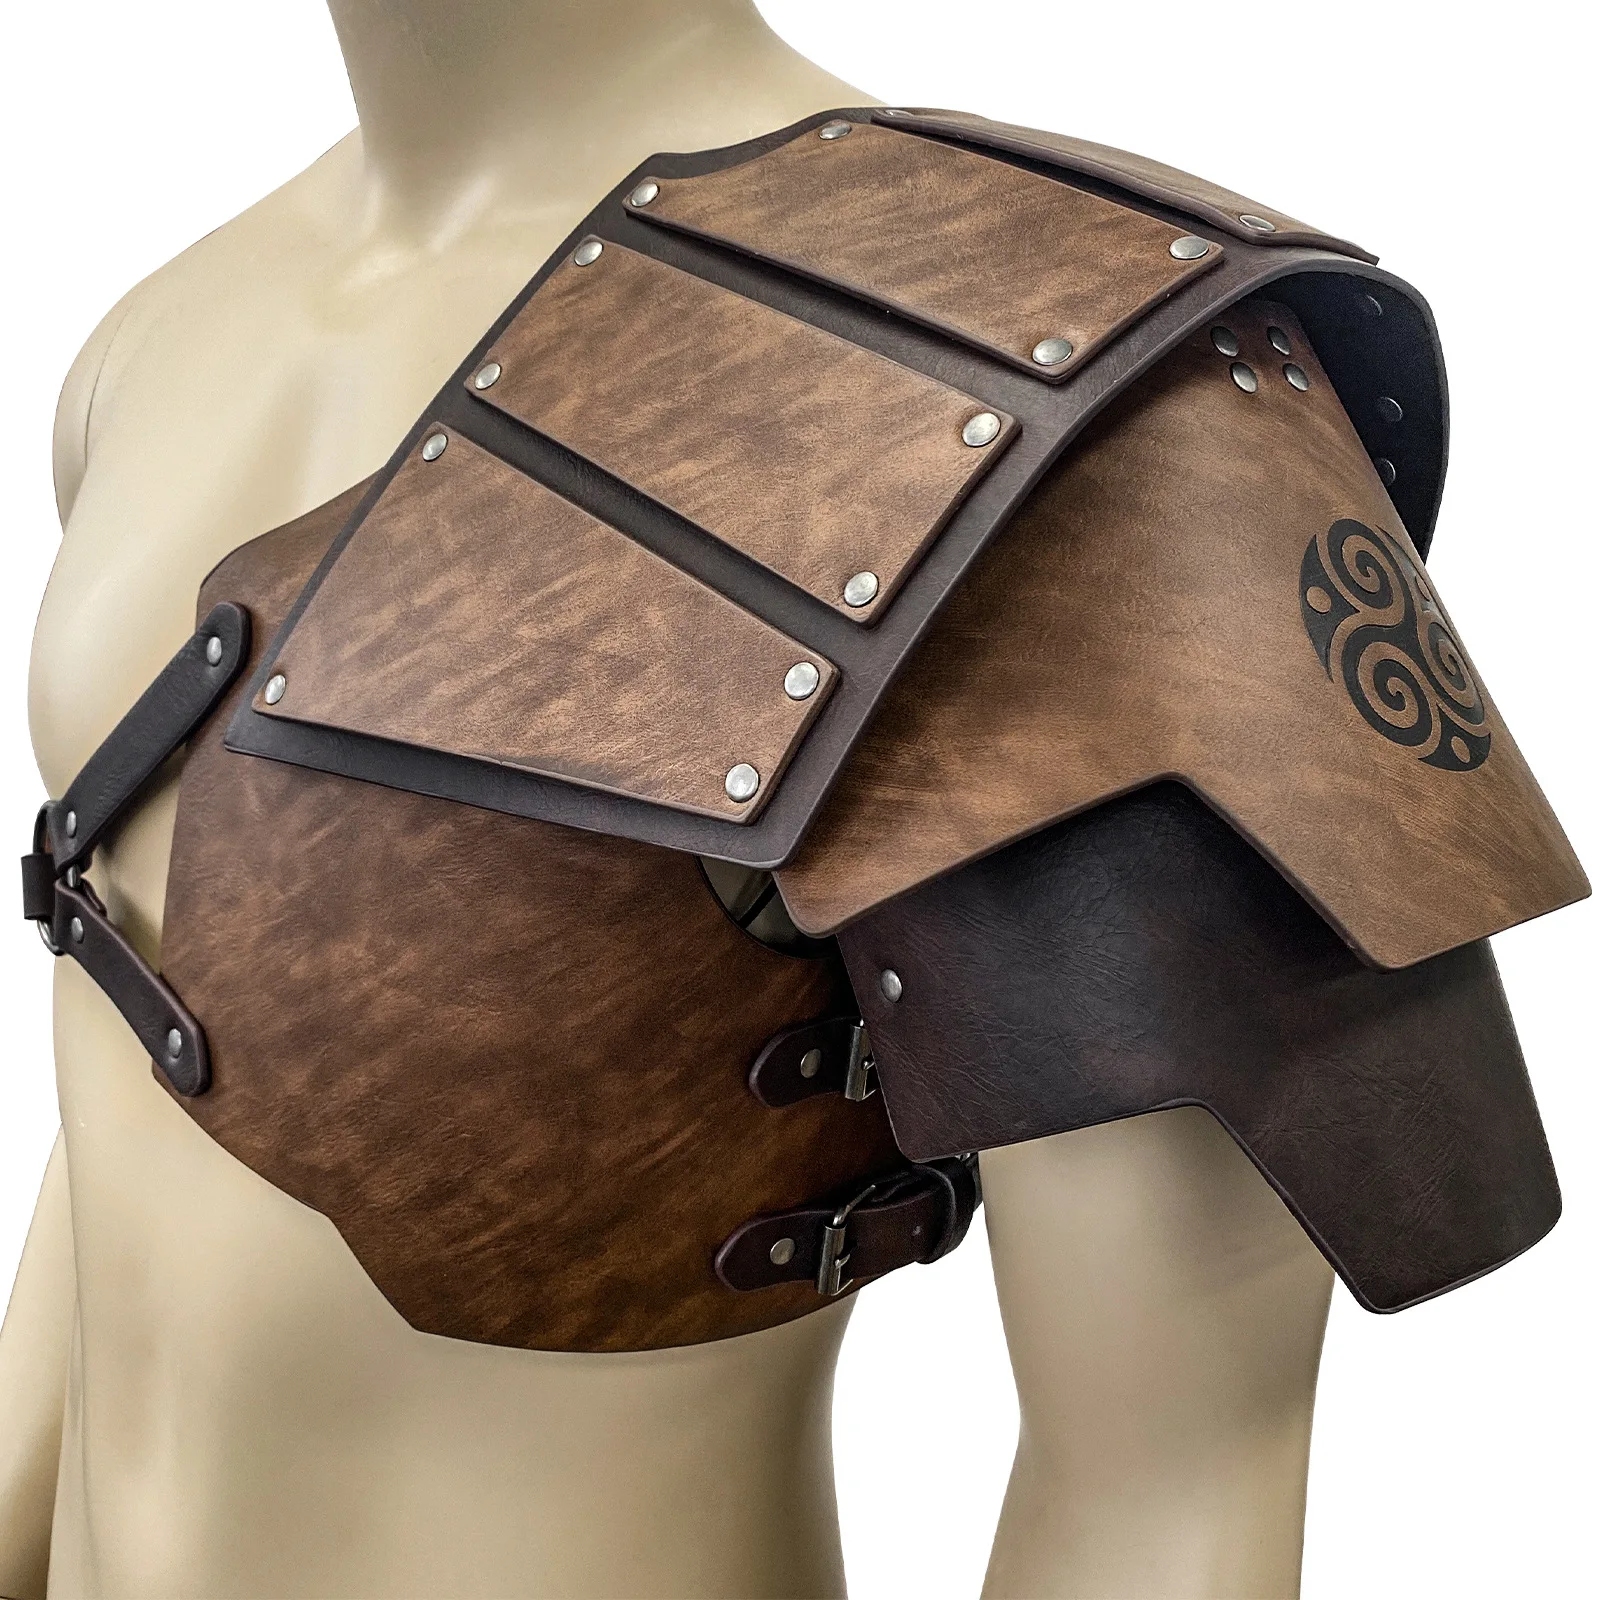 

NORRON Vikings Shoulder Wrister Genuine Leather Bracer Arm Armor Warrior Soldier Pirate Hunter Cuff Medieval Anime Cosplay Props